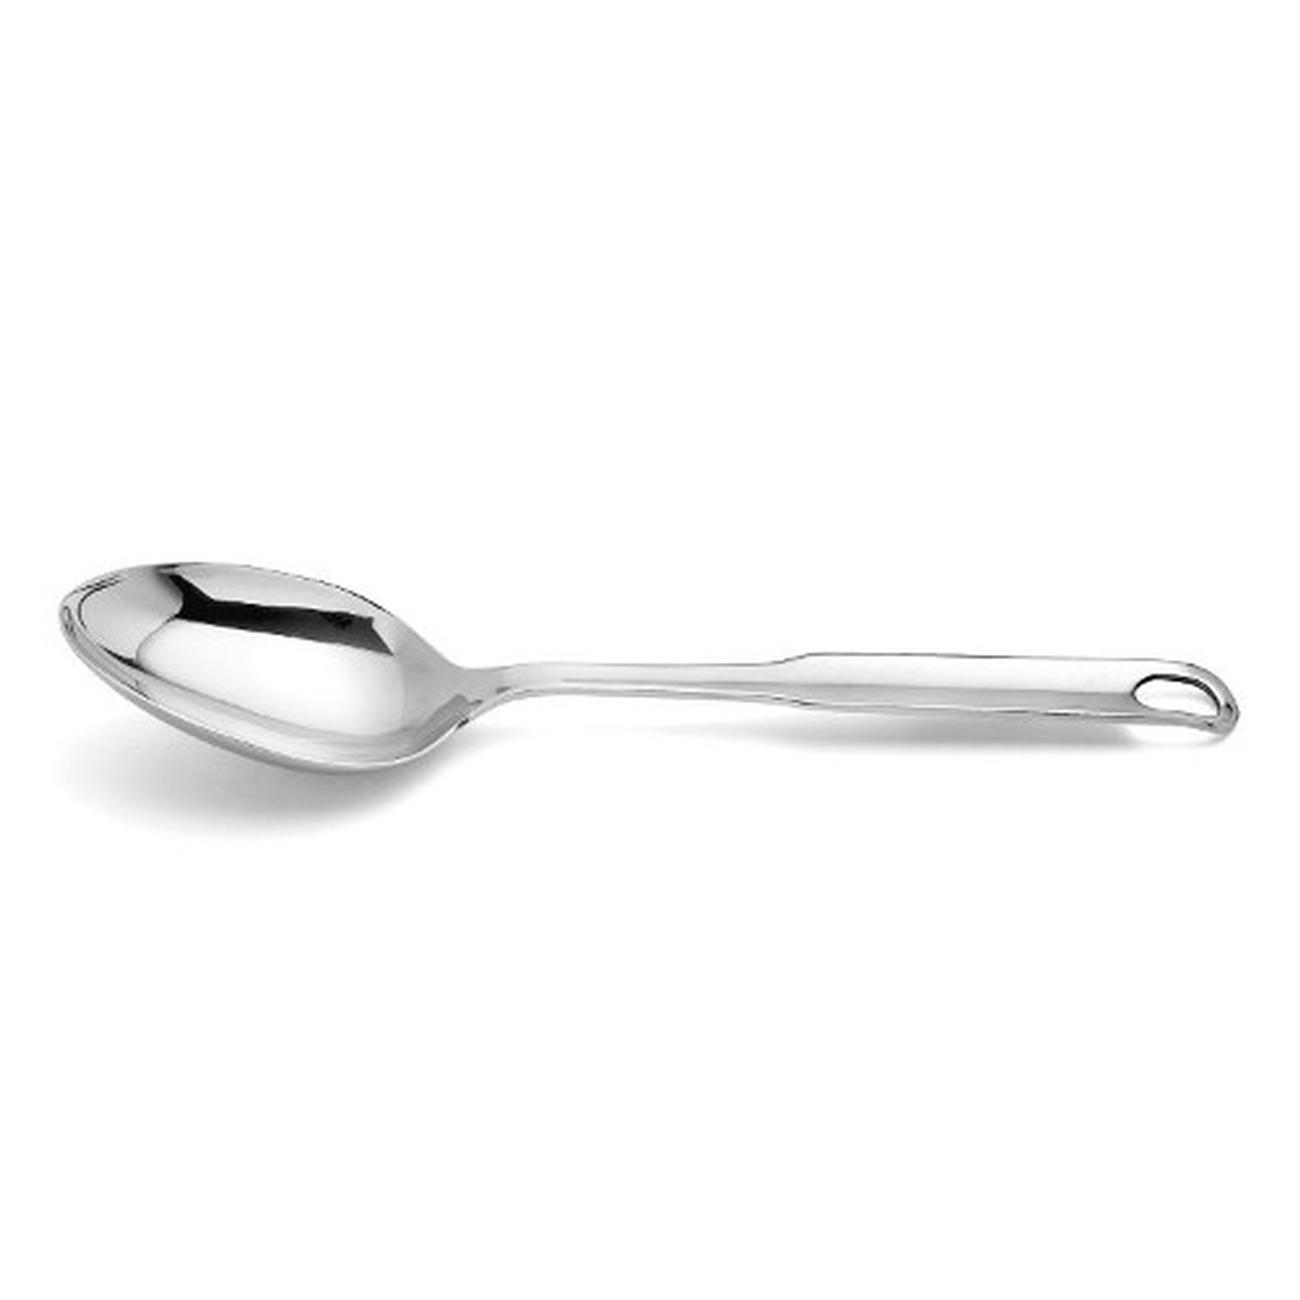 https://www.thekitchenwhisk.ie/contentFiles/productImages/Large/Chef-Stainless-Steel-Serving-Spoon-Weis.jpg